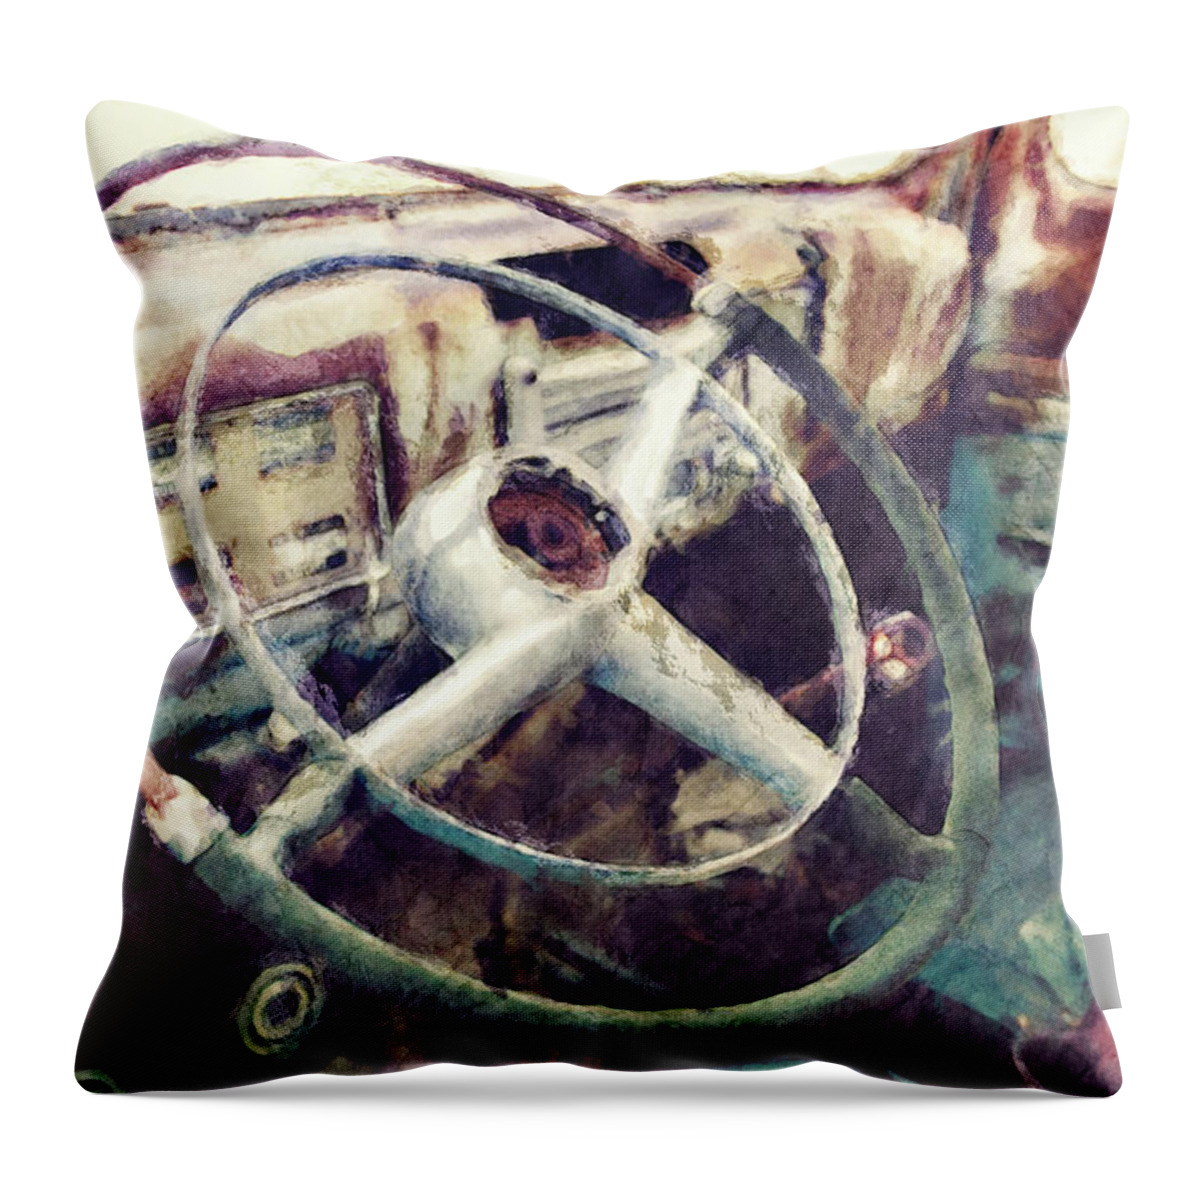 Truck Throw Pillow featuring the photograph Vintage Pickup Truck by Phil Perkins